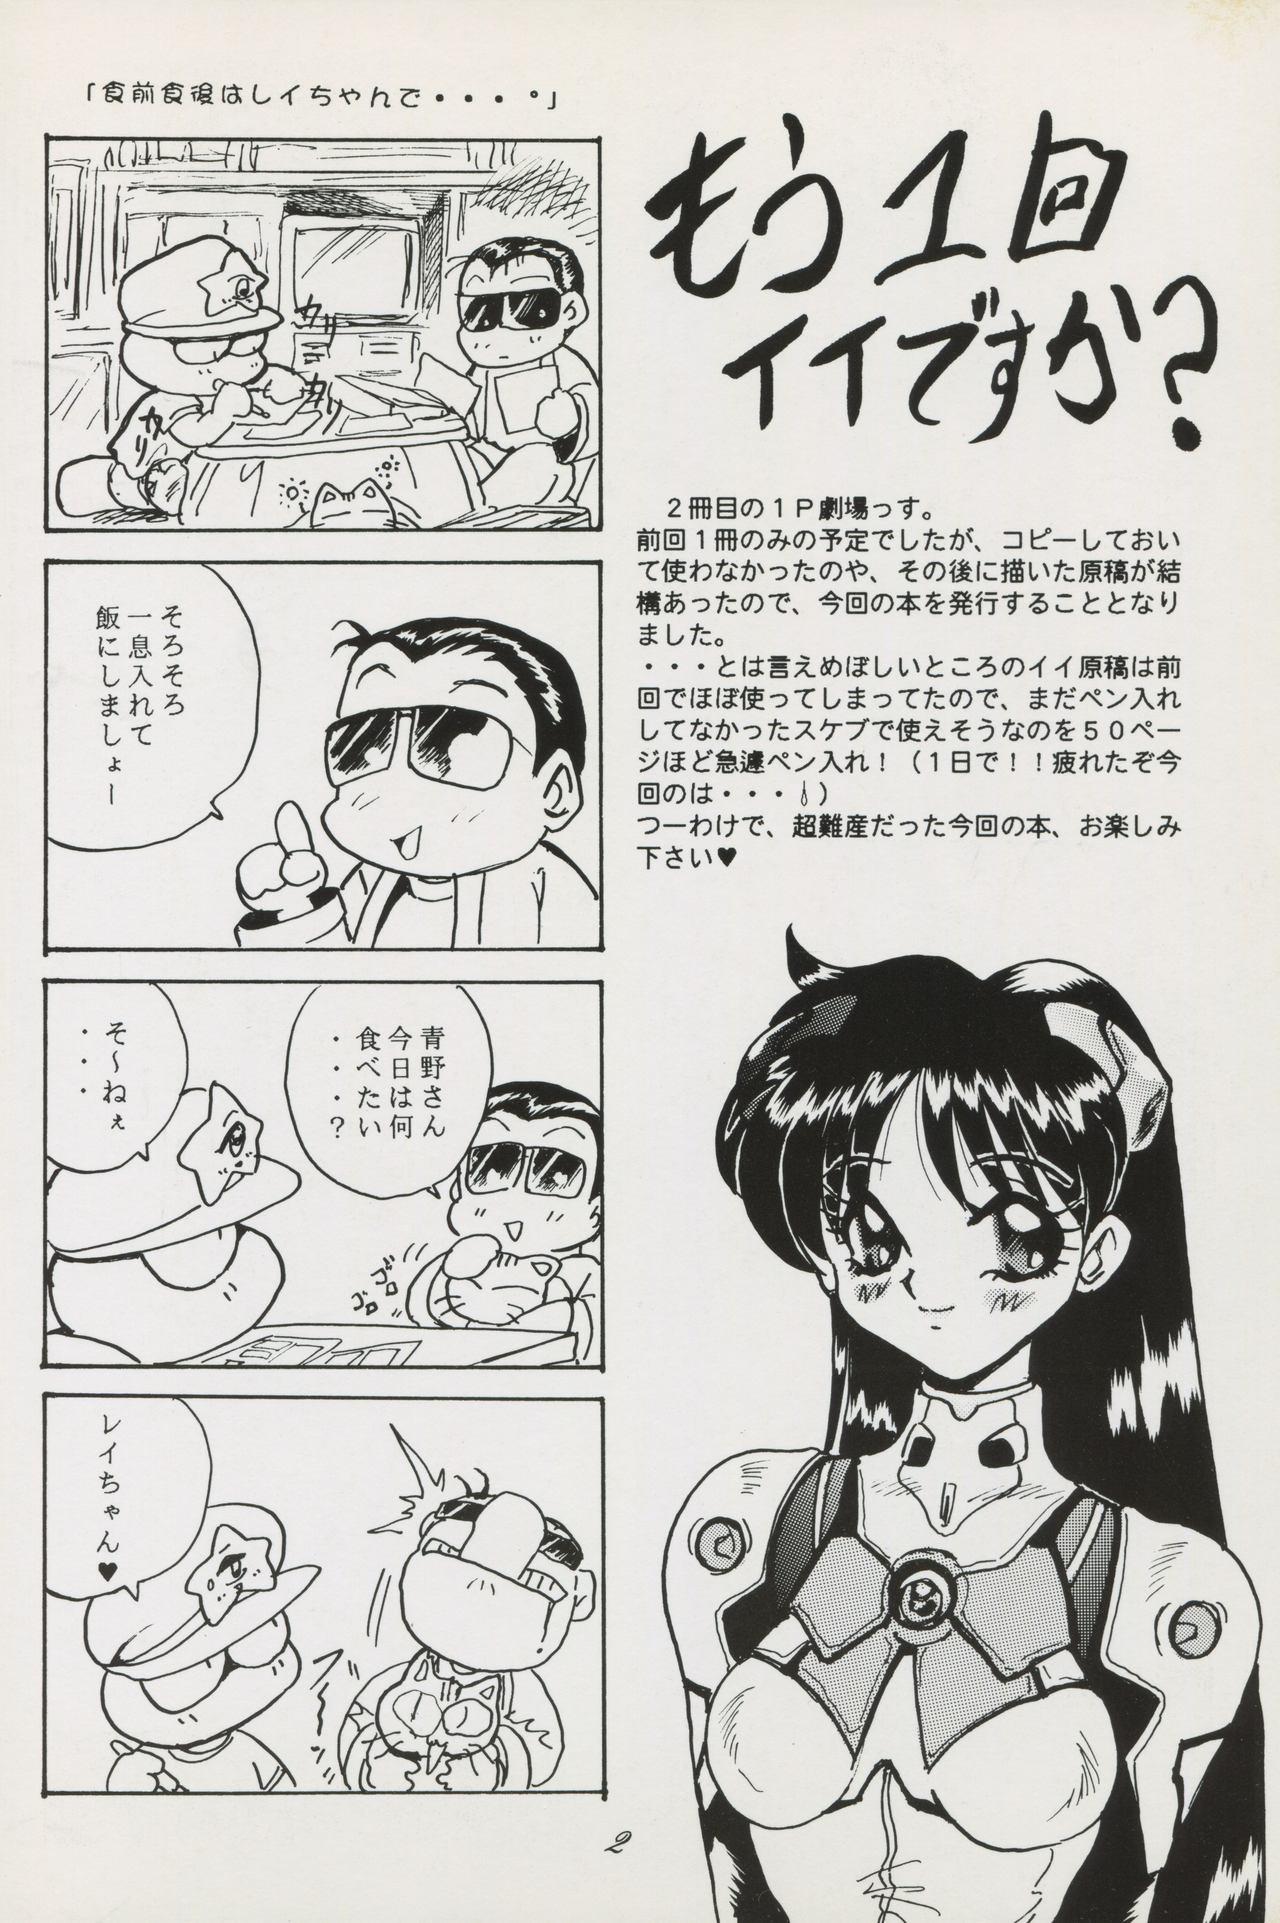 Amateur Sailor Moon 1 Page Gekijou P2 - SAILOR MOON ONE PAGE THEATER II - Sailor moon Gaystraight - Page 2